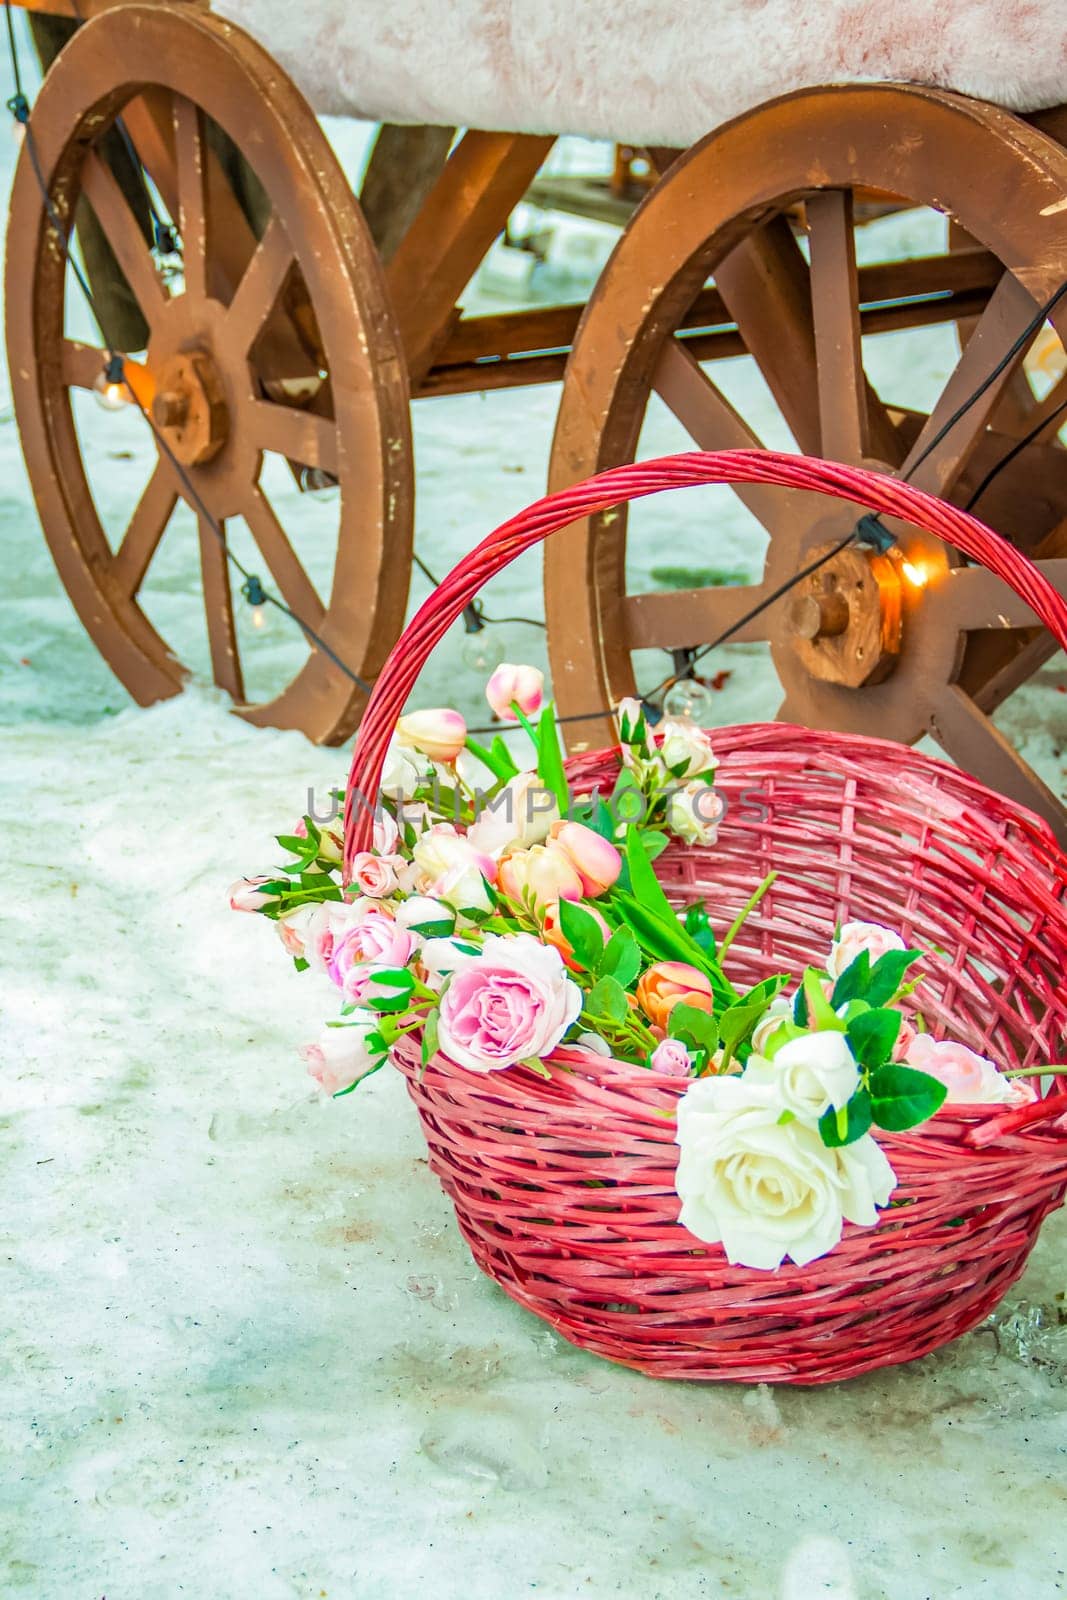 A wicker basket with beautiful flowers stands on the snow near the cart wheel. Flowers in a pink basket